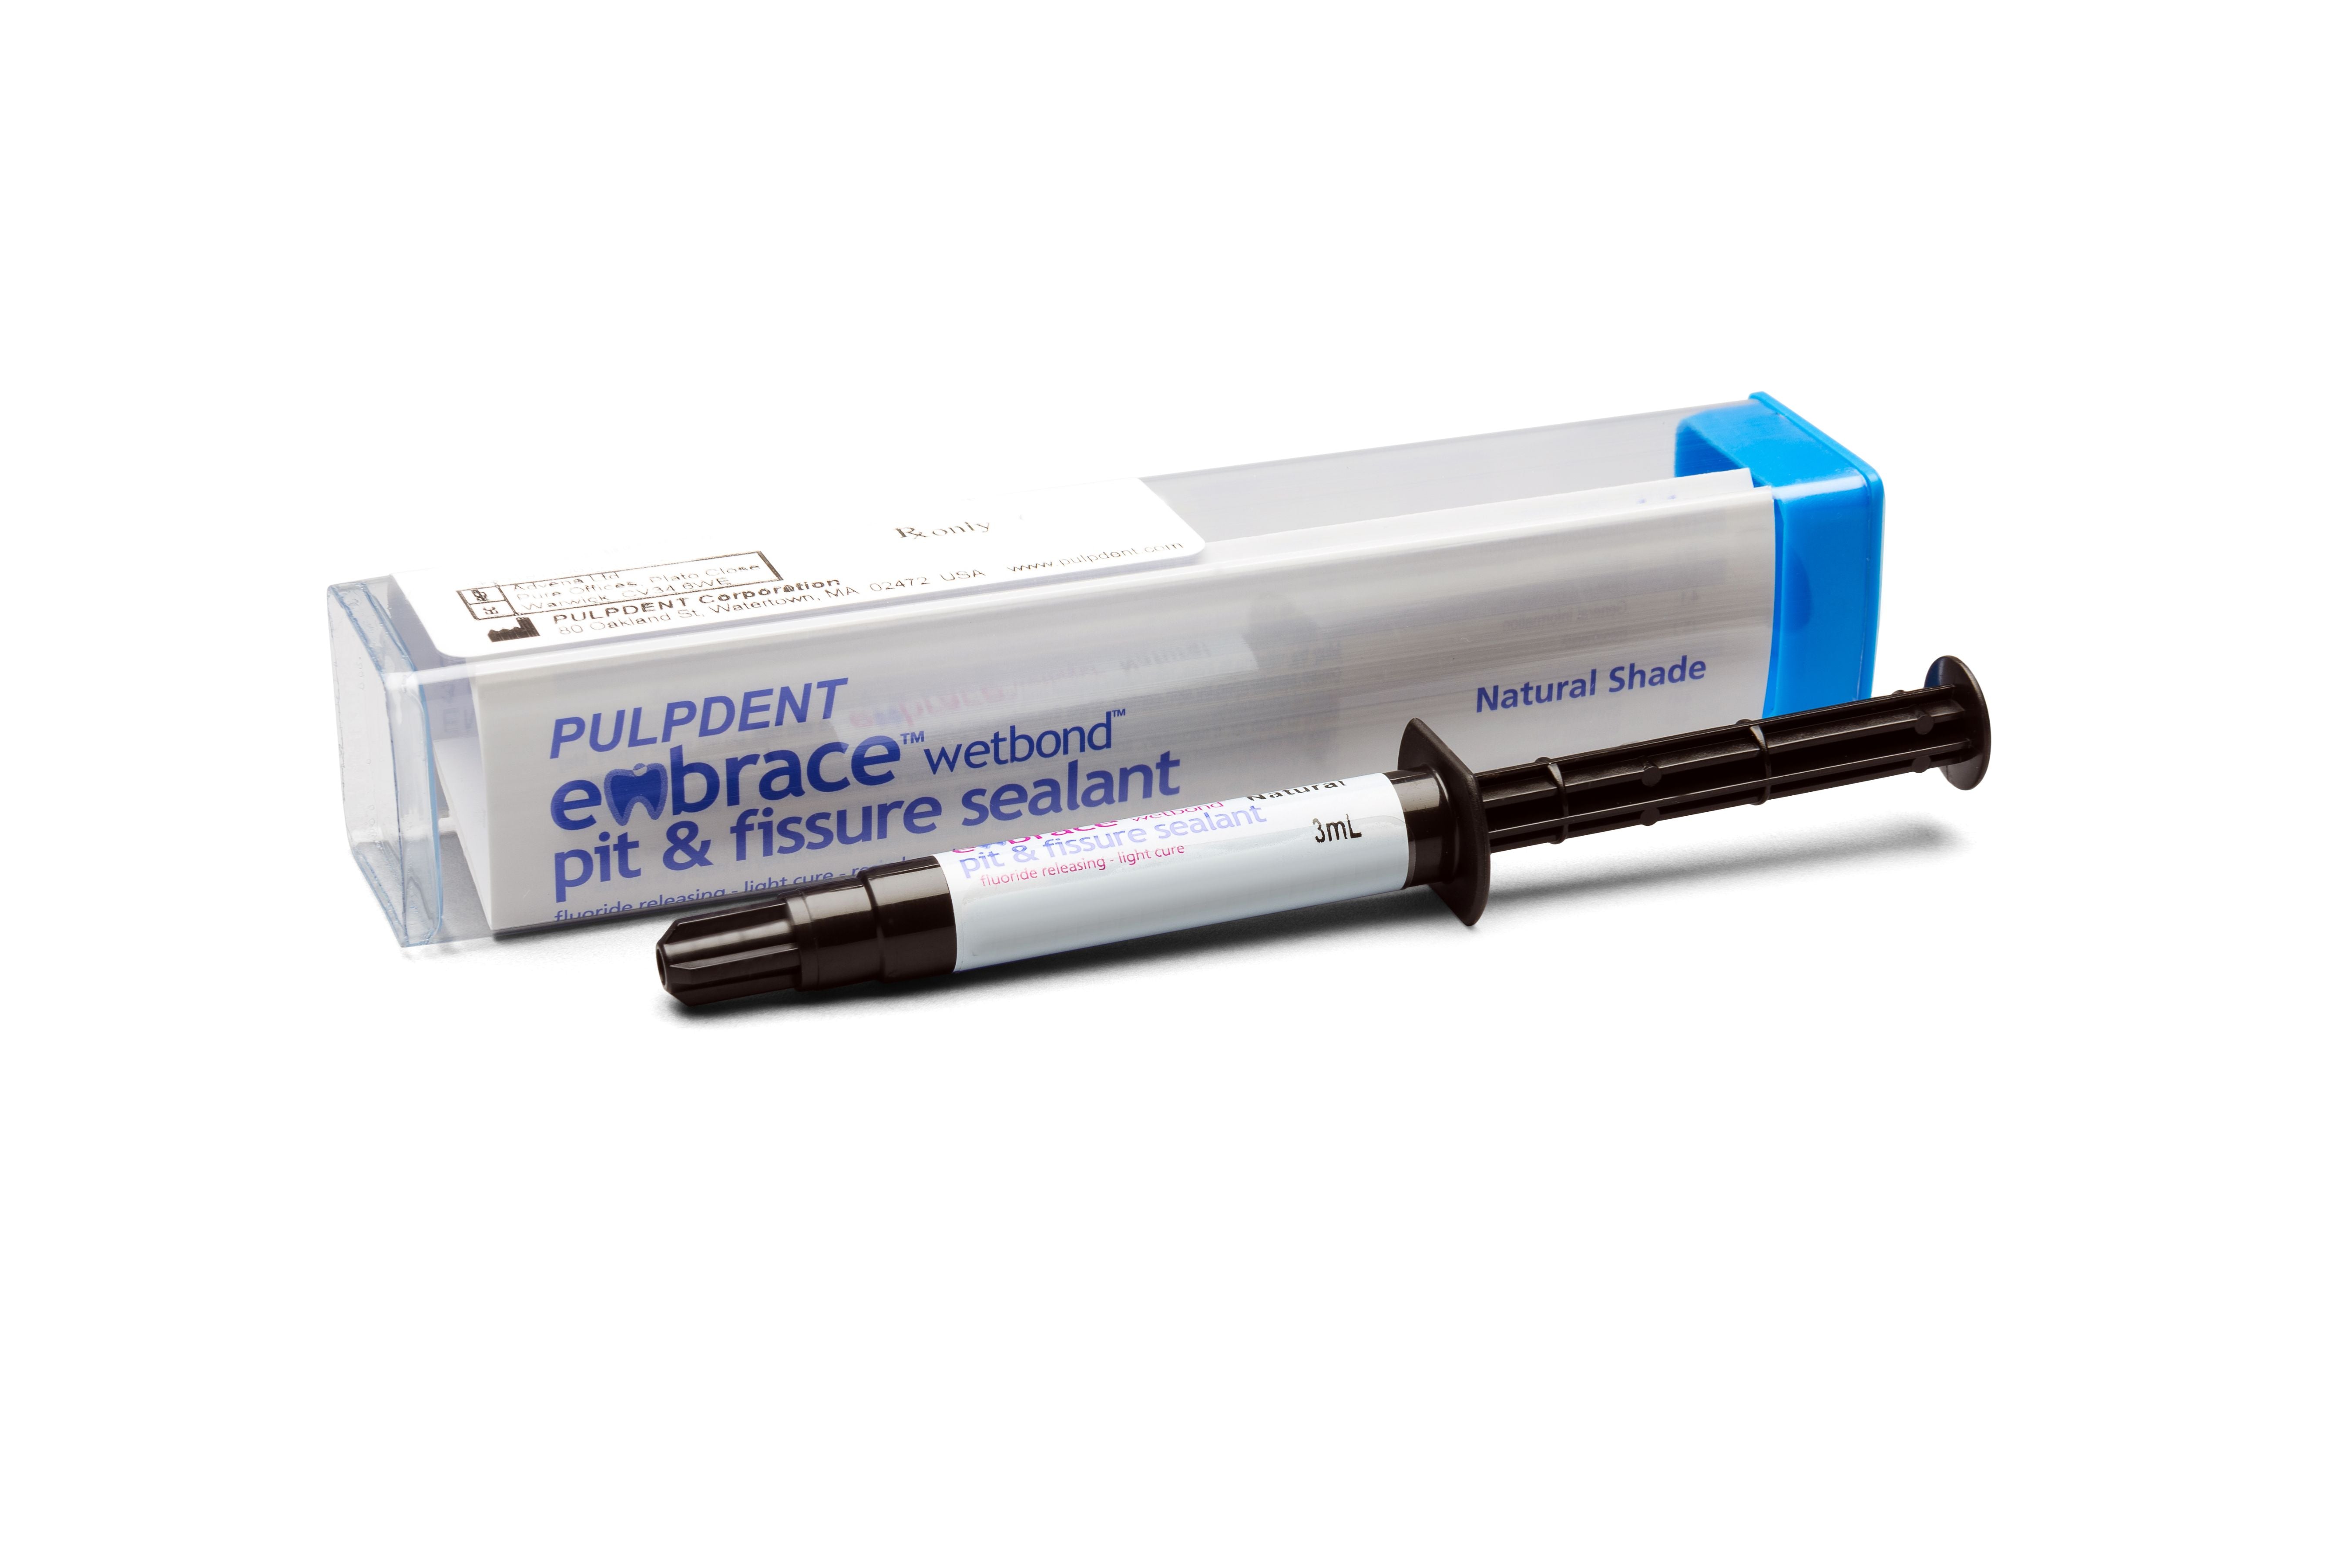 Embrace Wetbond Pit and Fissure Sealant